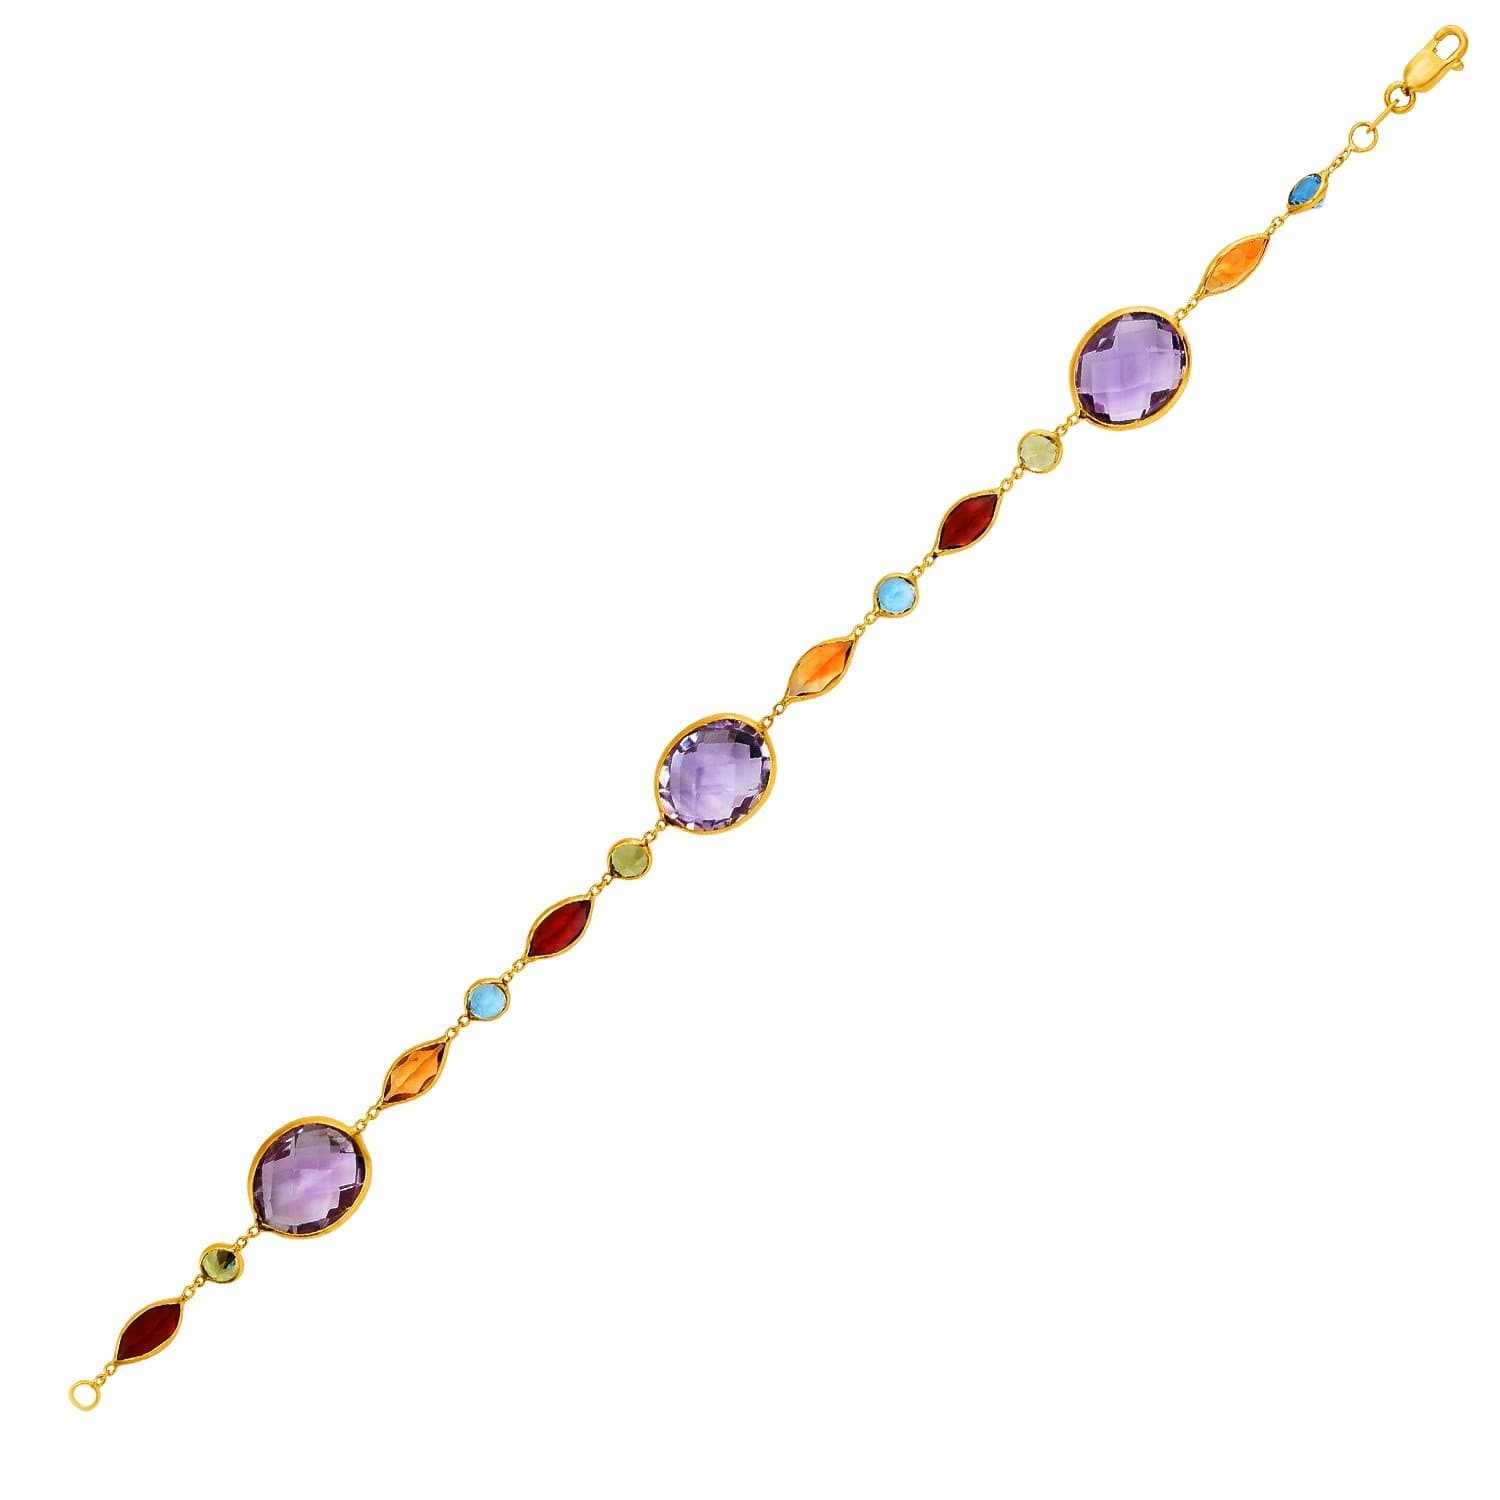 14k Yellow Gold Bracelet with Multi-Colored Stones